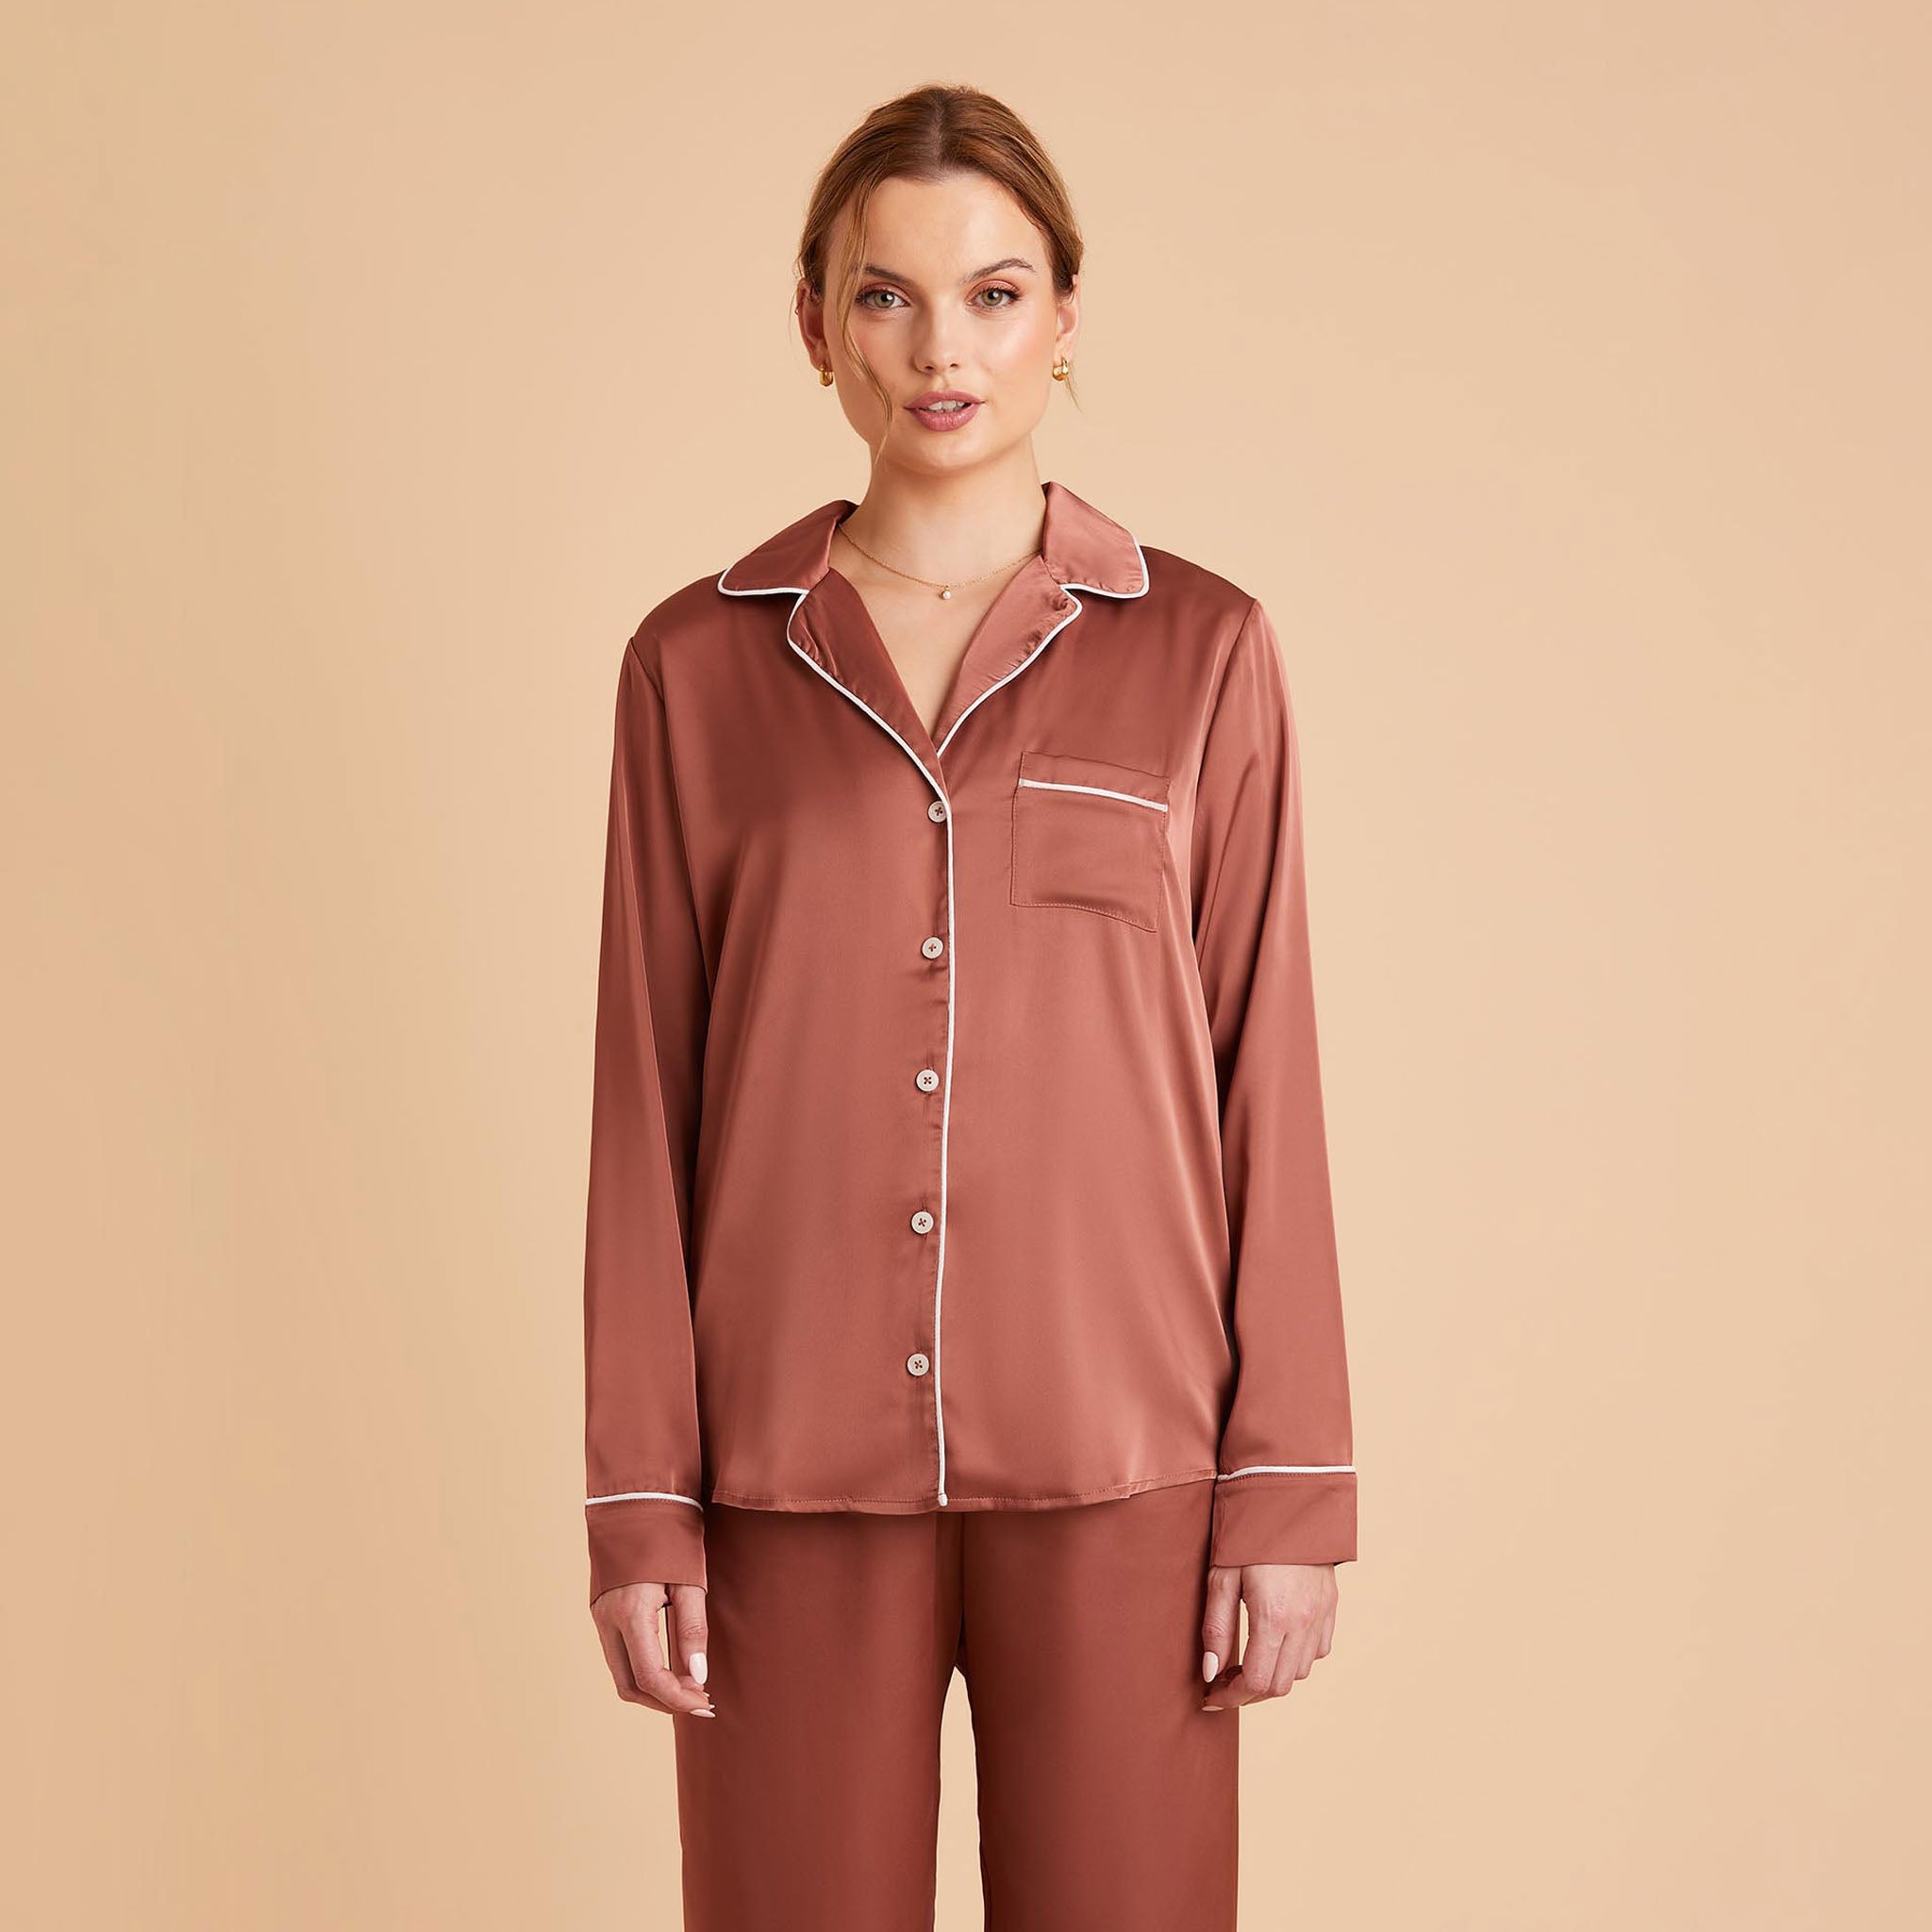 Jonny Satin Long Sleeve Pajama Top With White Piping in desert rose, front view